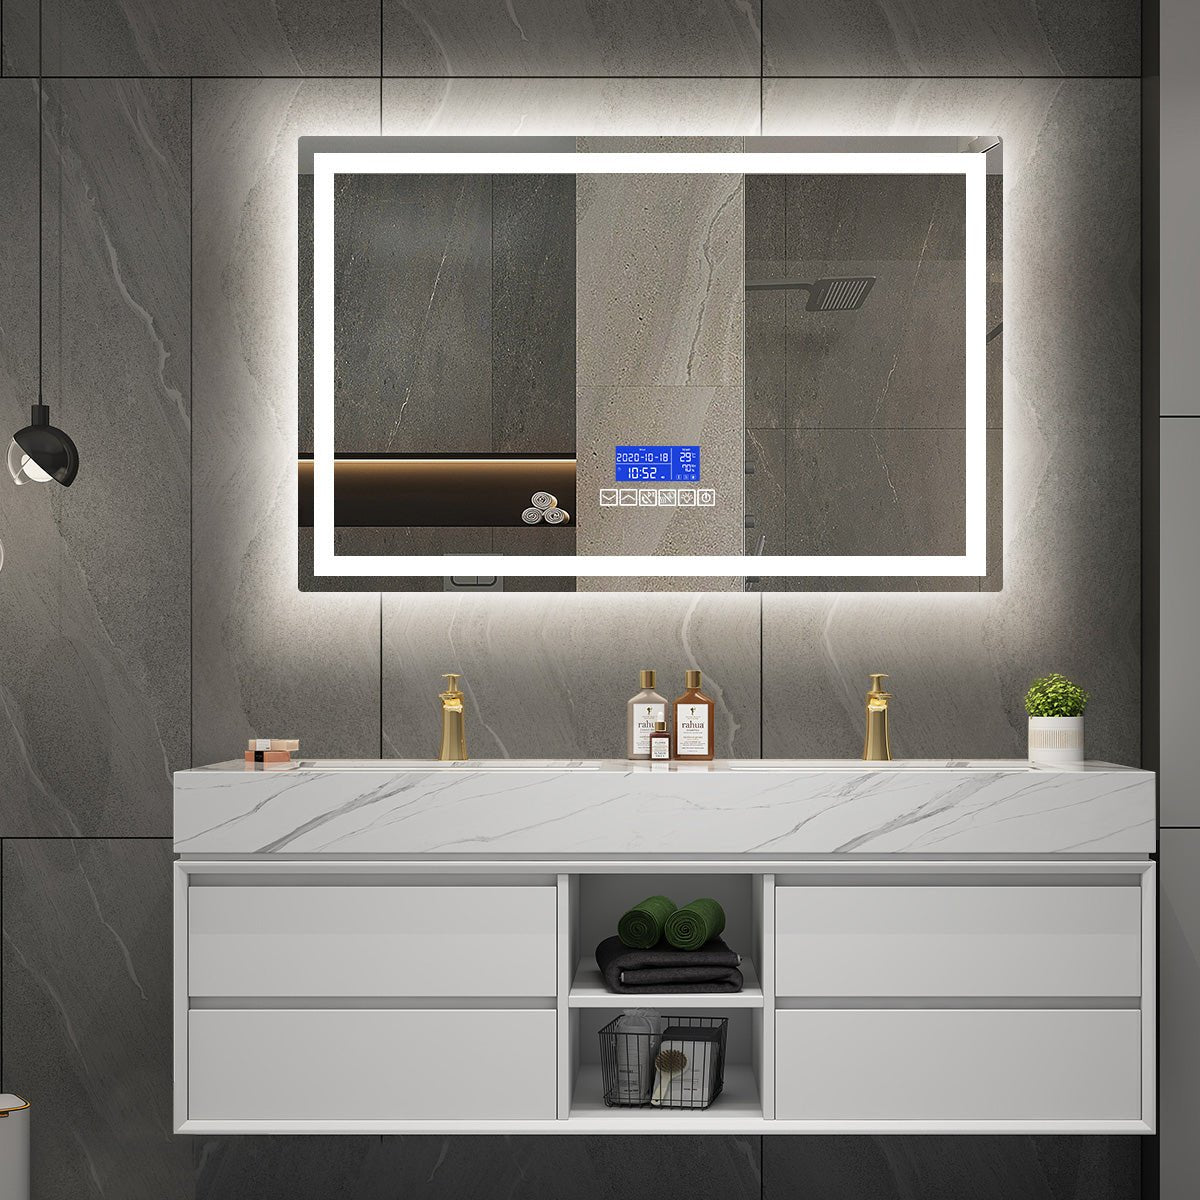 Smart LED Mirror with Time/Temperature/Calendar Display, Bluetooth, A Demister, Three Brightness Levels, Dimmer - Mirror World